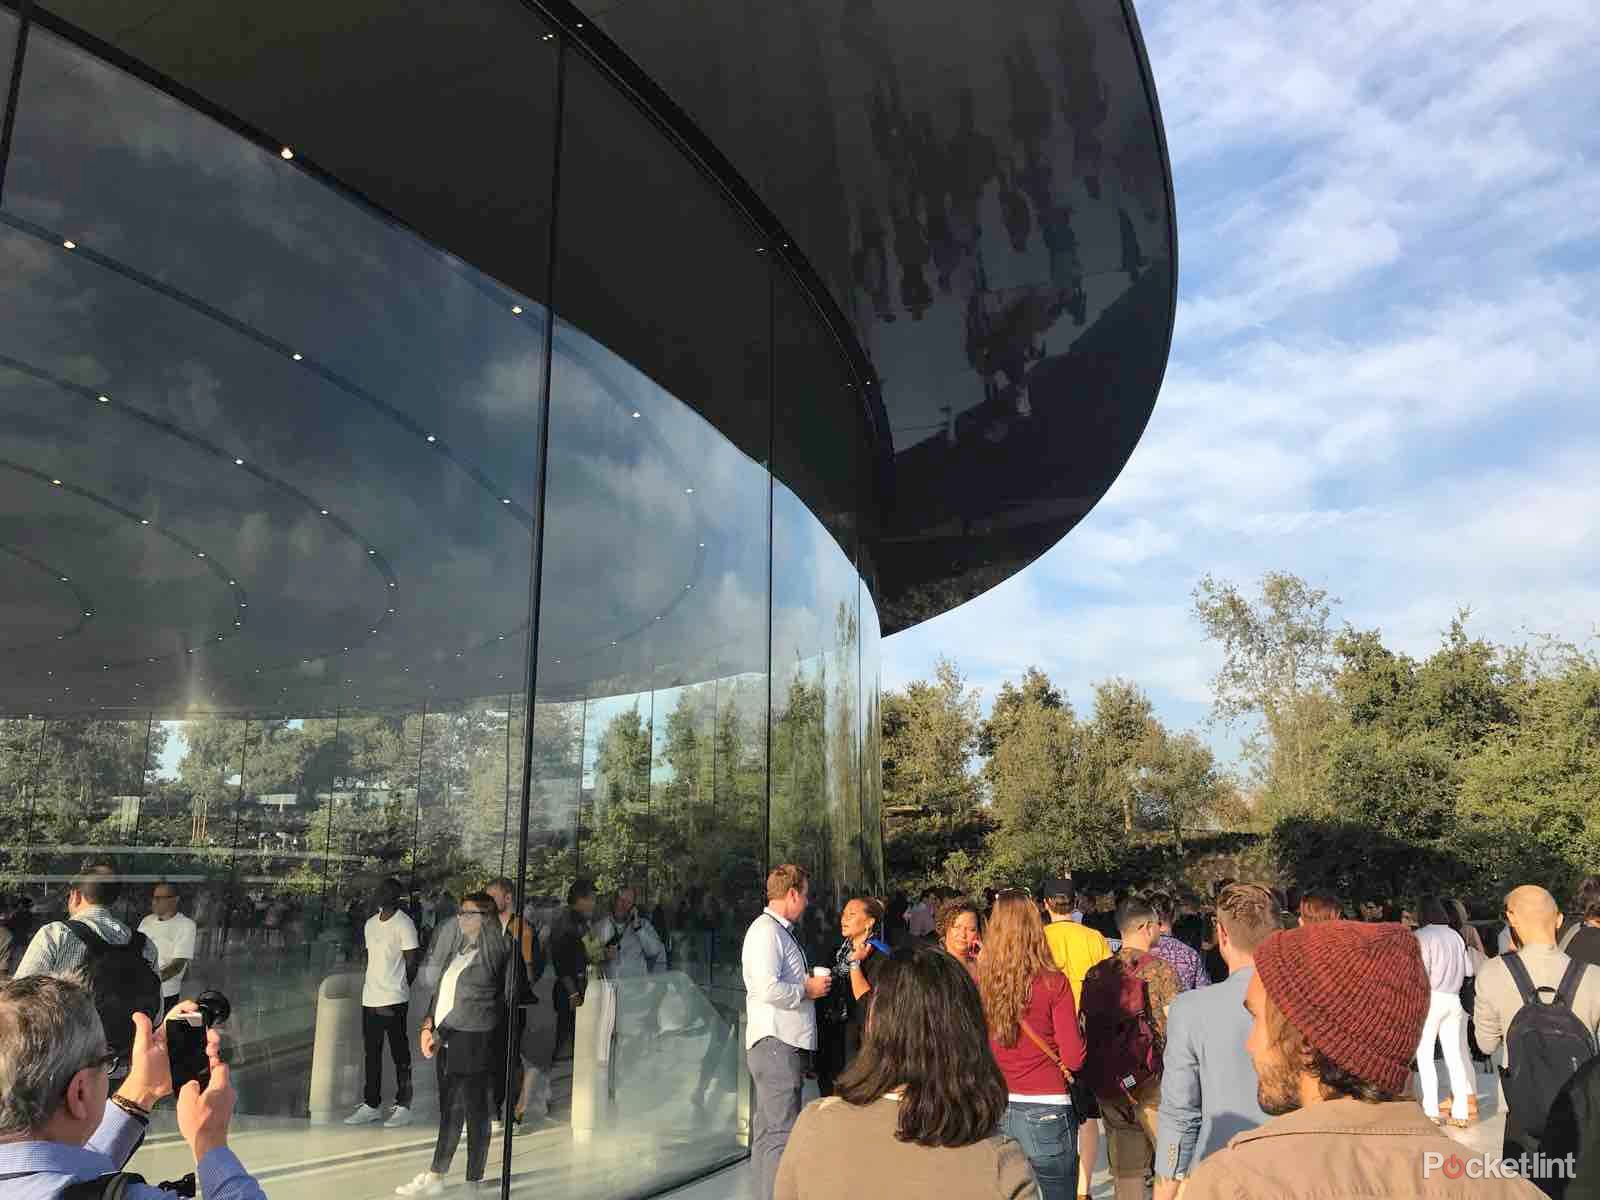 Apples Steve Jobs Theatre in pictures image 2